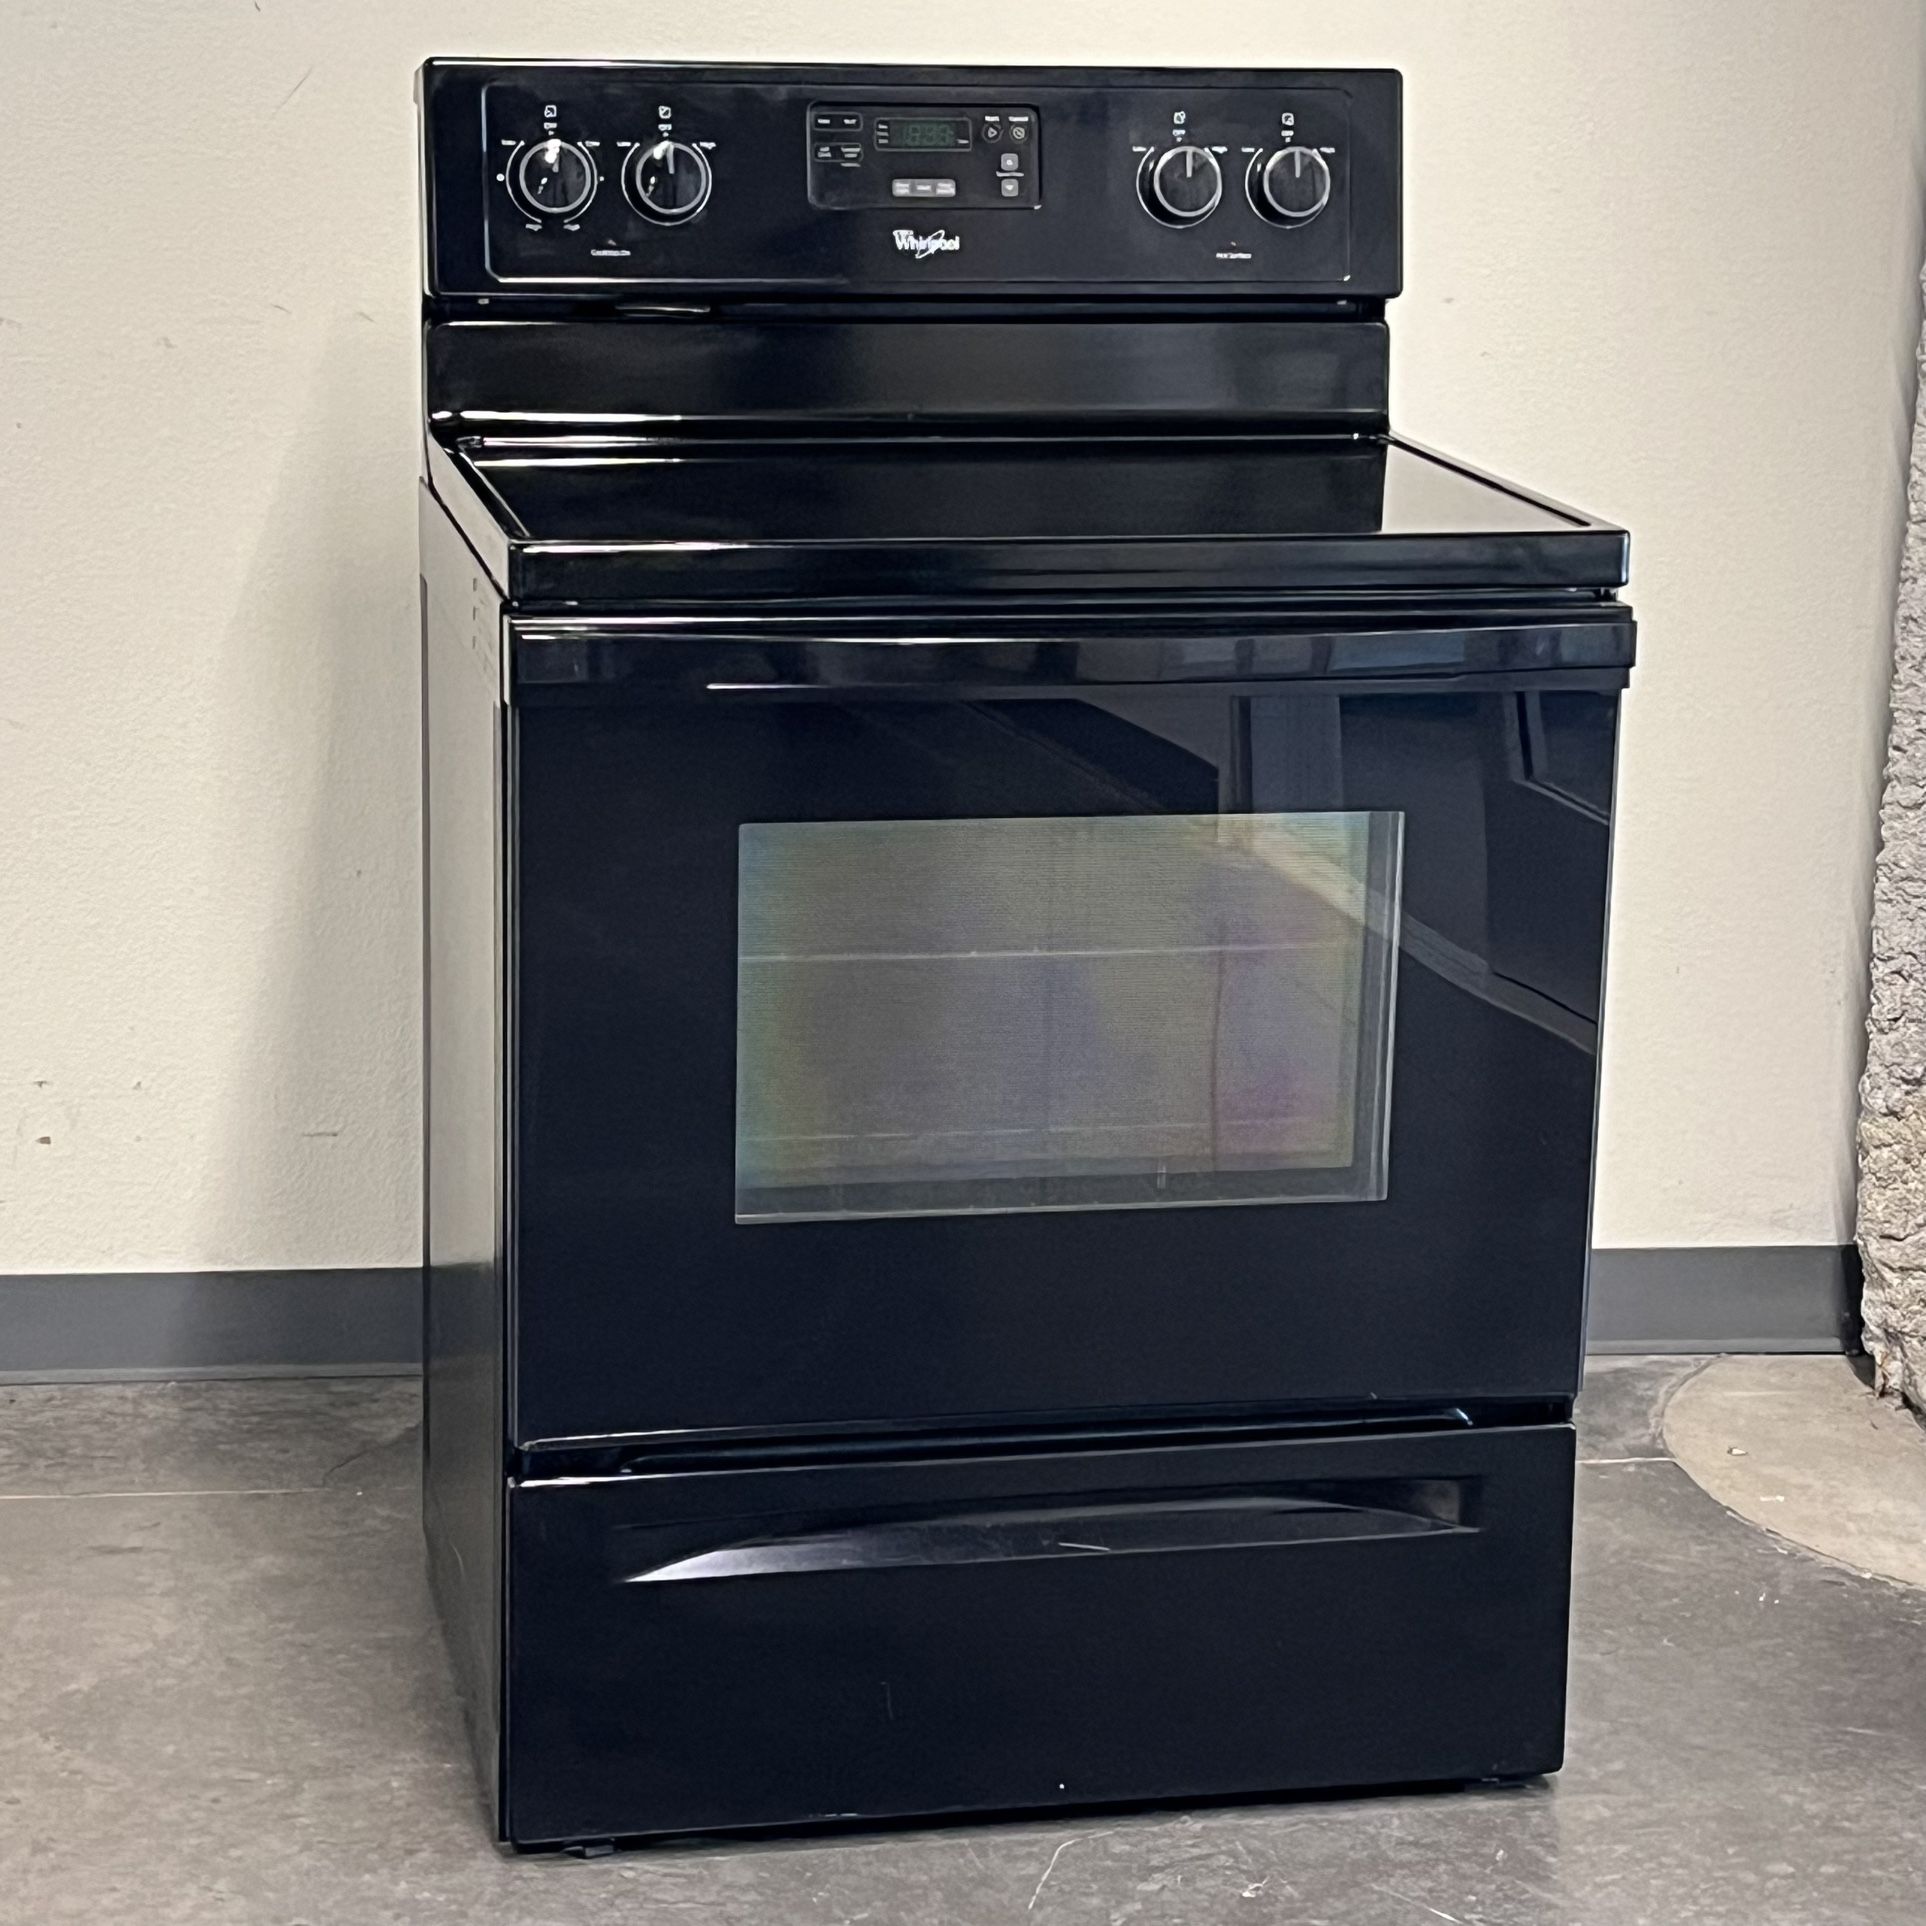 Whirlpool Glass Top Electric Stove, Oven Fits A 30 Inch Wide Opening Delivery Available